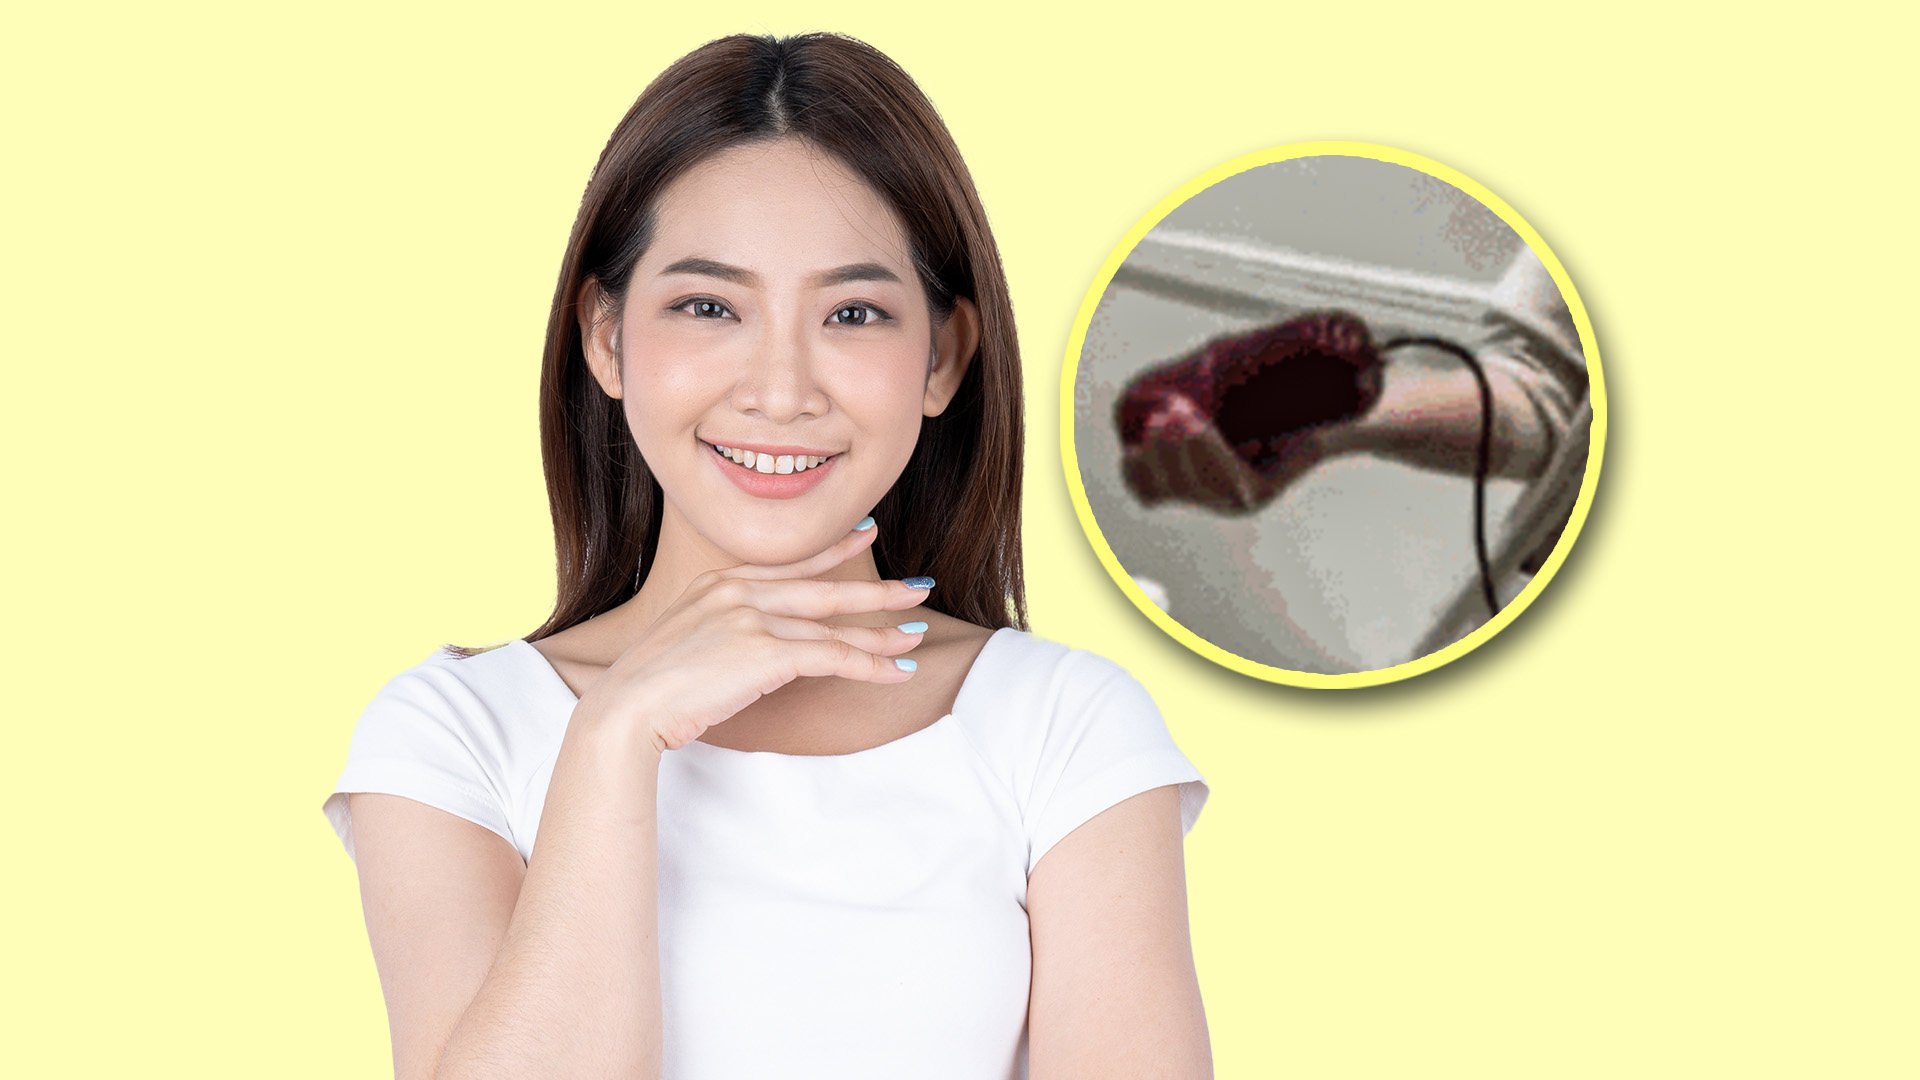 A new “blood purification” beauty treatment in China which involves the extraction and re-injection of plasma has raised health fears among experts and faced criticism on mainland social media. Photo: SCMP composite/Shutterstock/The Paper
